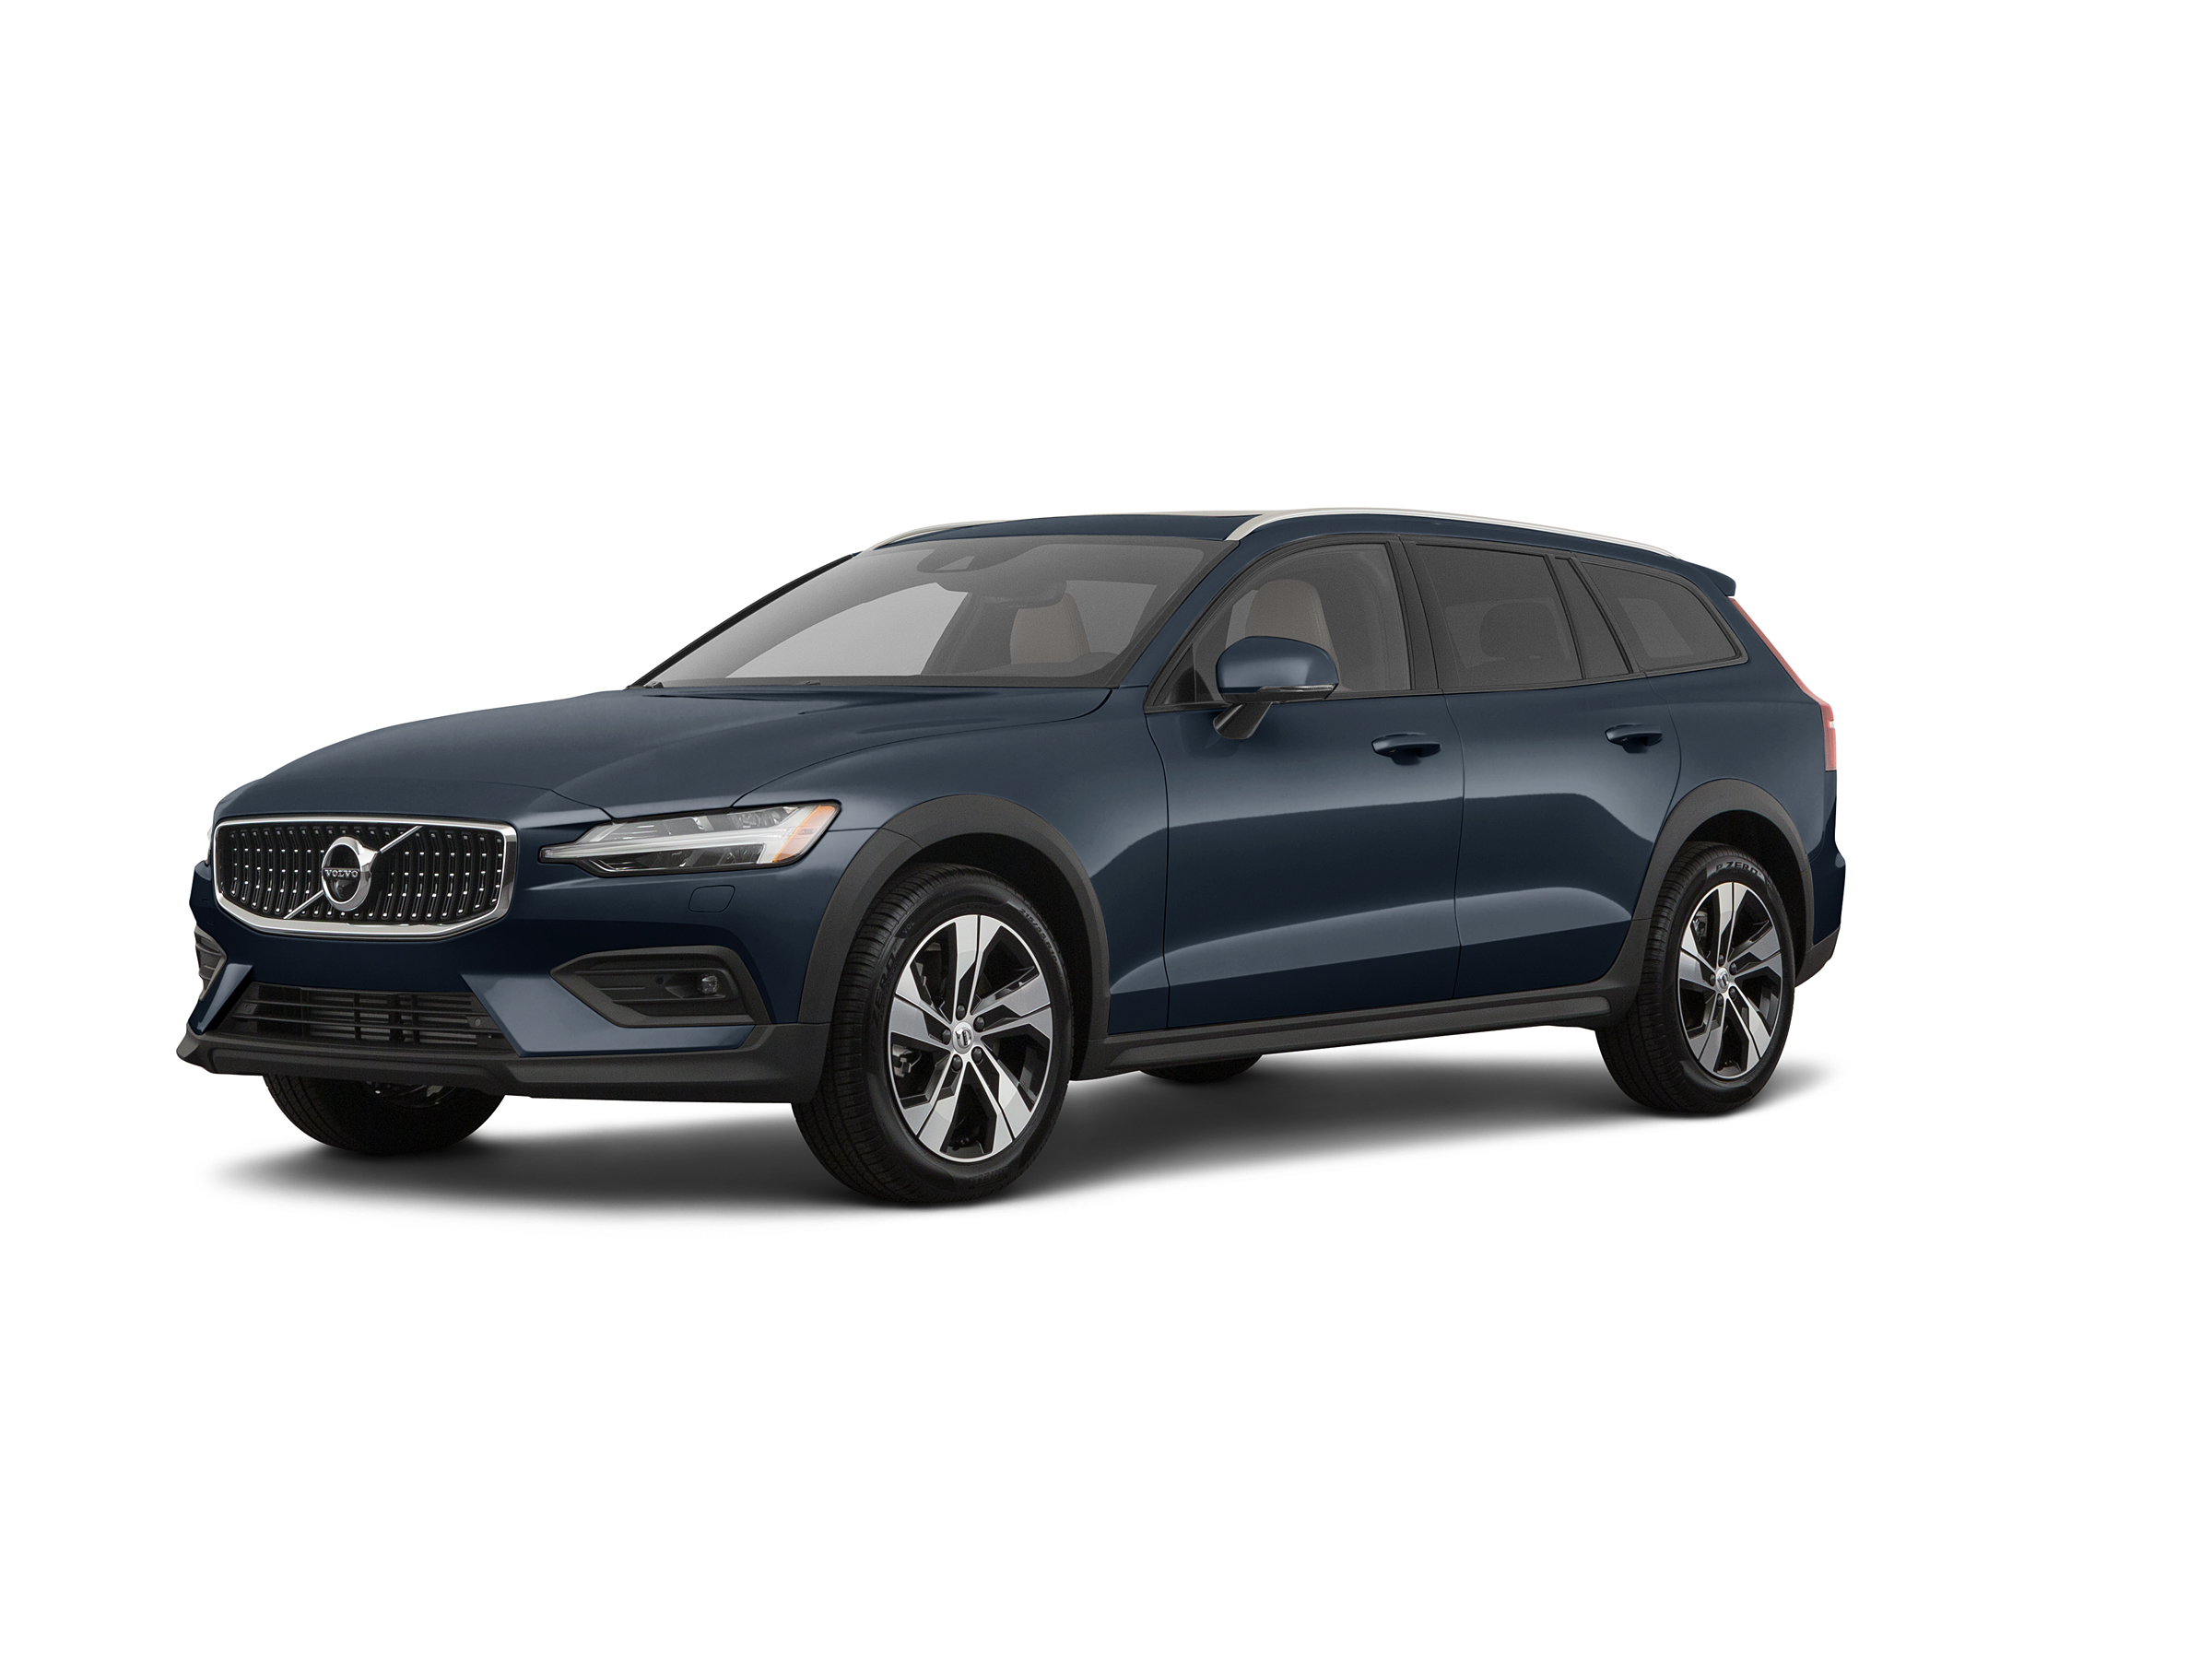 2021 Volvo V90 Cross Country is an achingly pretty wagon with a  sophisticated all-wheel-drive system